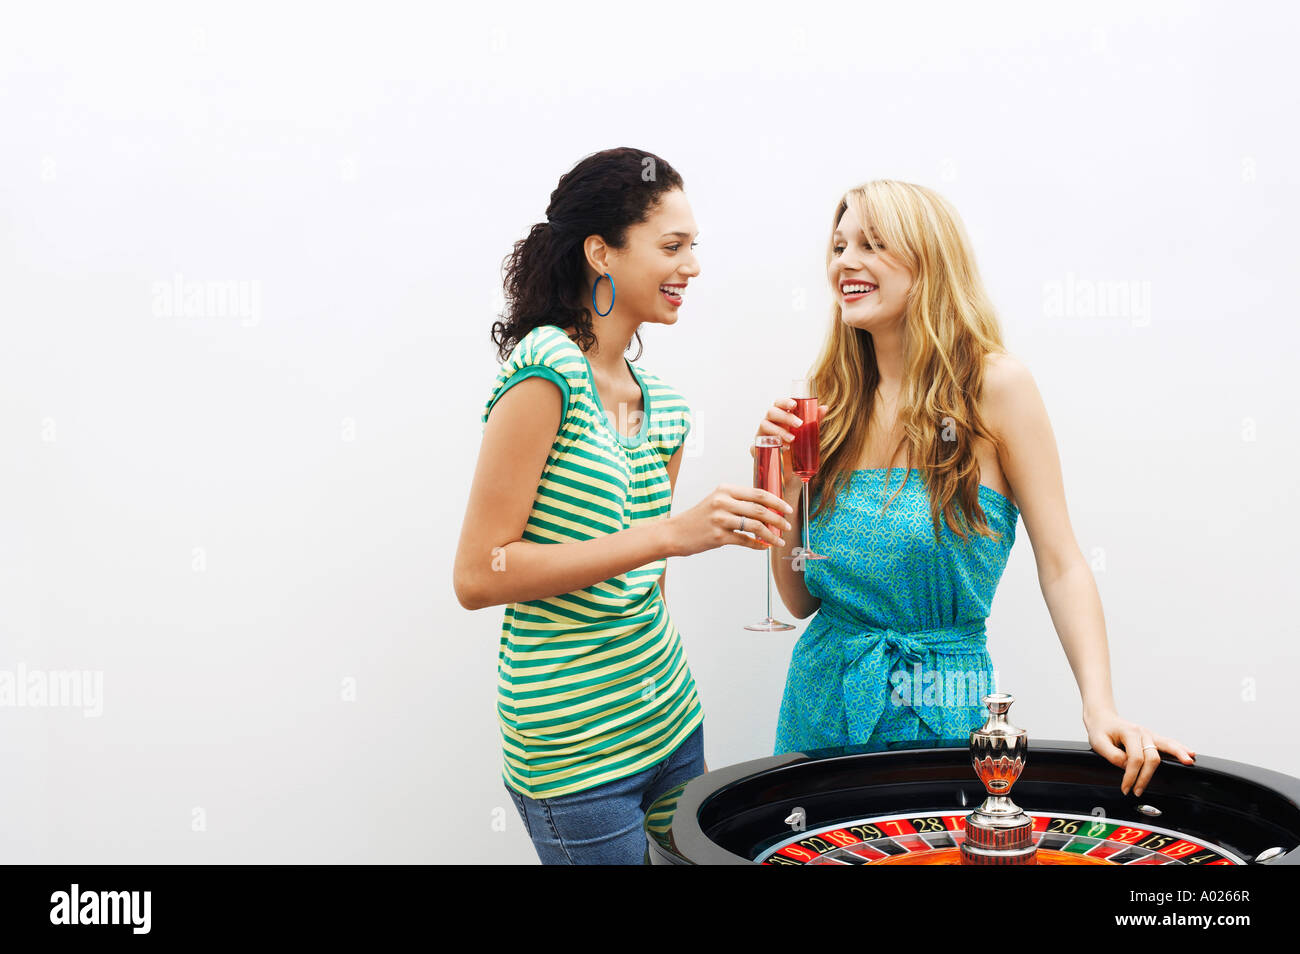 Two young women drinking cocktails by roulette wheel Stock Photo